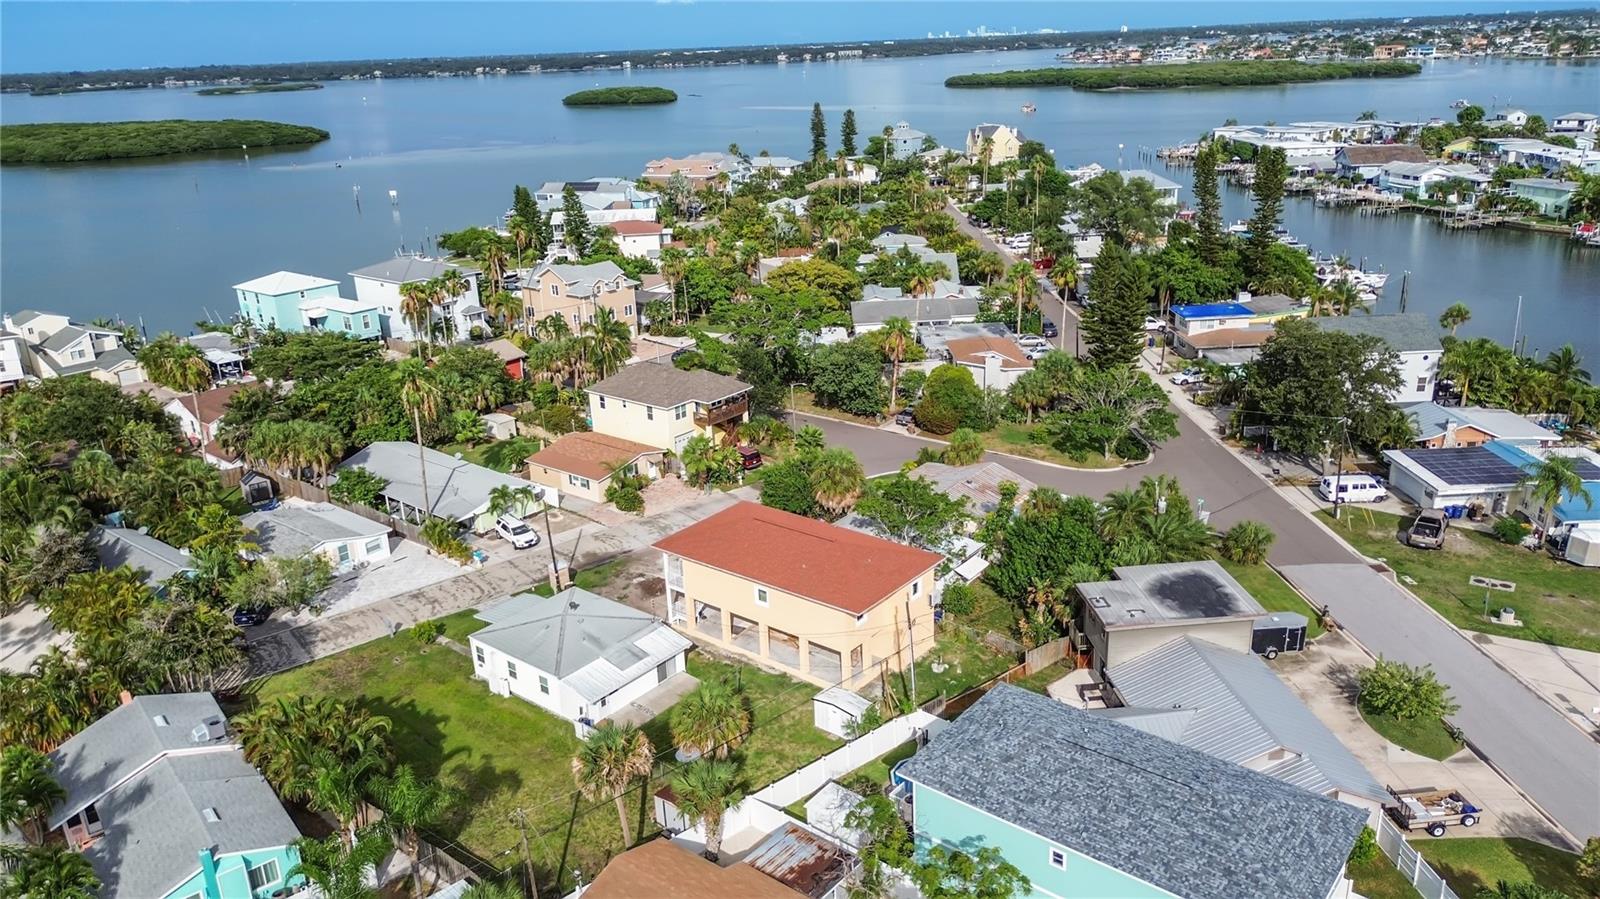 Waterfront neighborhood with several street-end parks that provide water access.